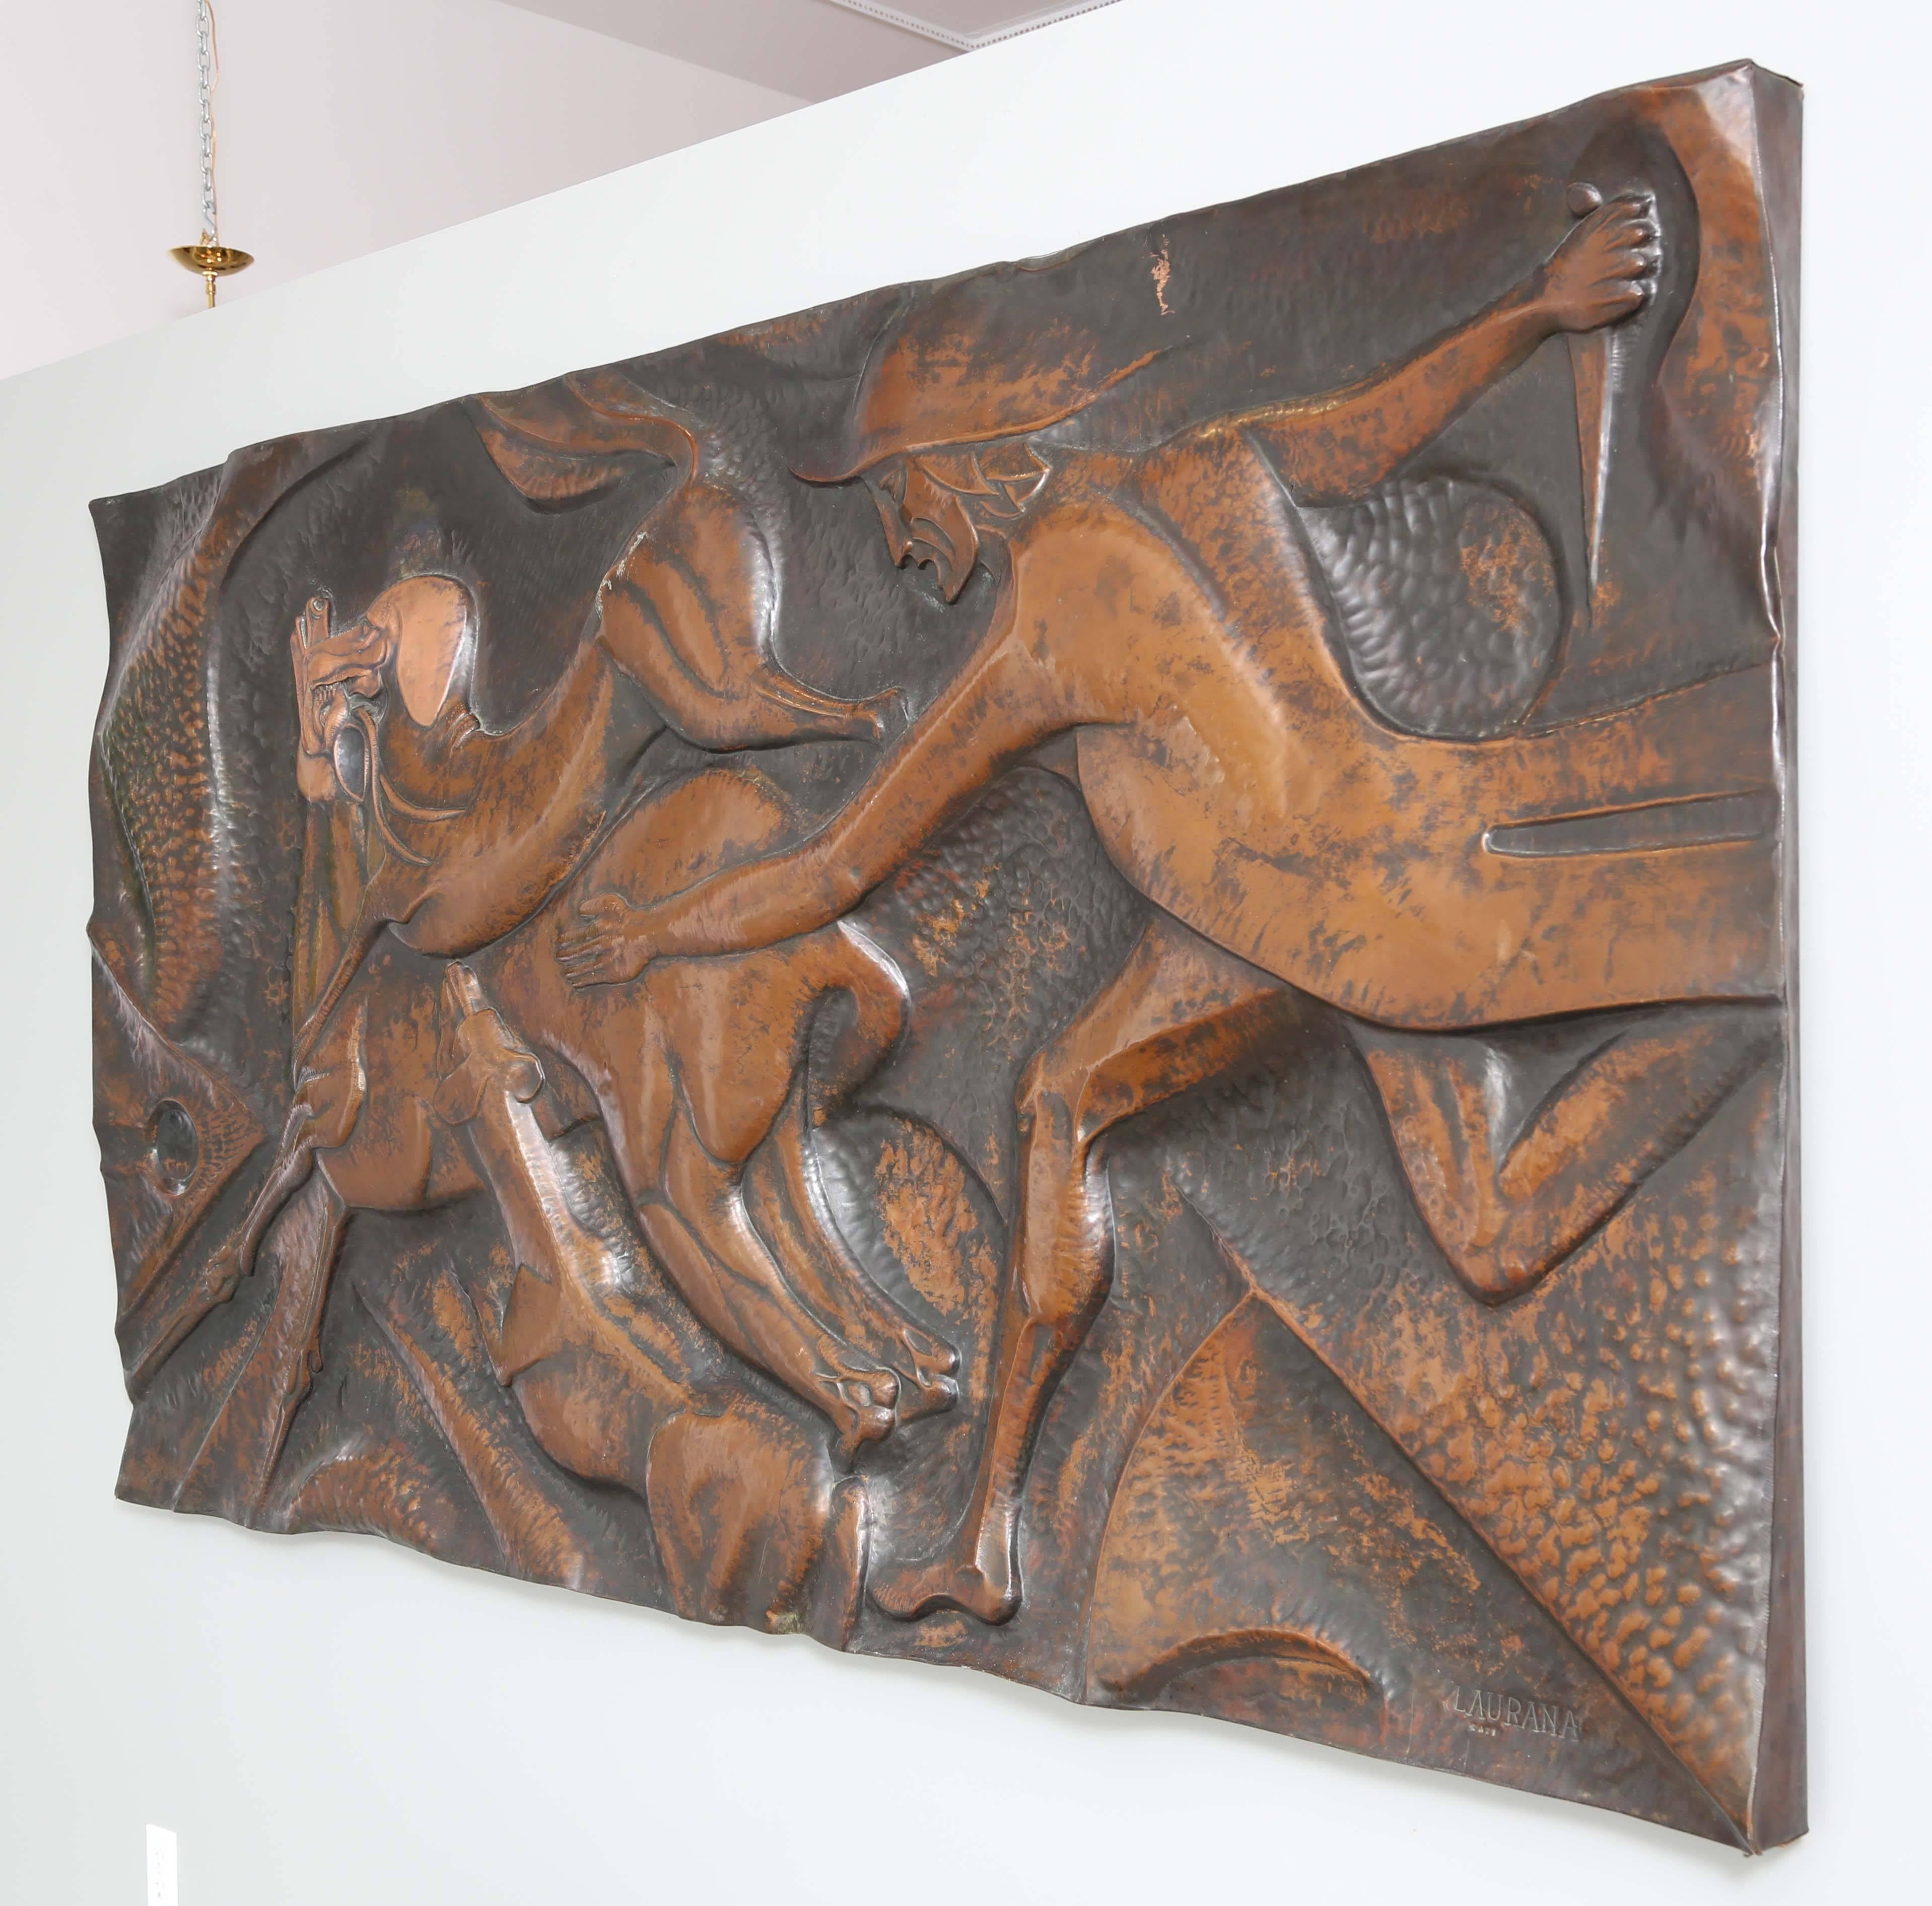 Gigantic artist made copper wall plaque with hunt motif with dog attacking an antelope. The piece is signed: Laurana which is a studio in Pesaro, Italy. The work is entitled "Dazi". It is attributed to the master Franco Bastianelli whose